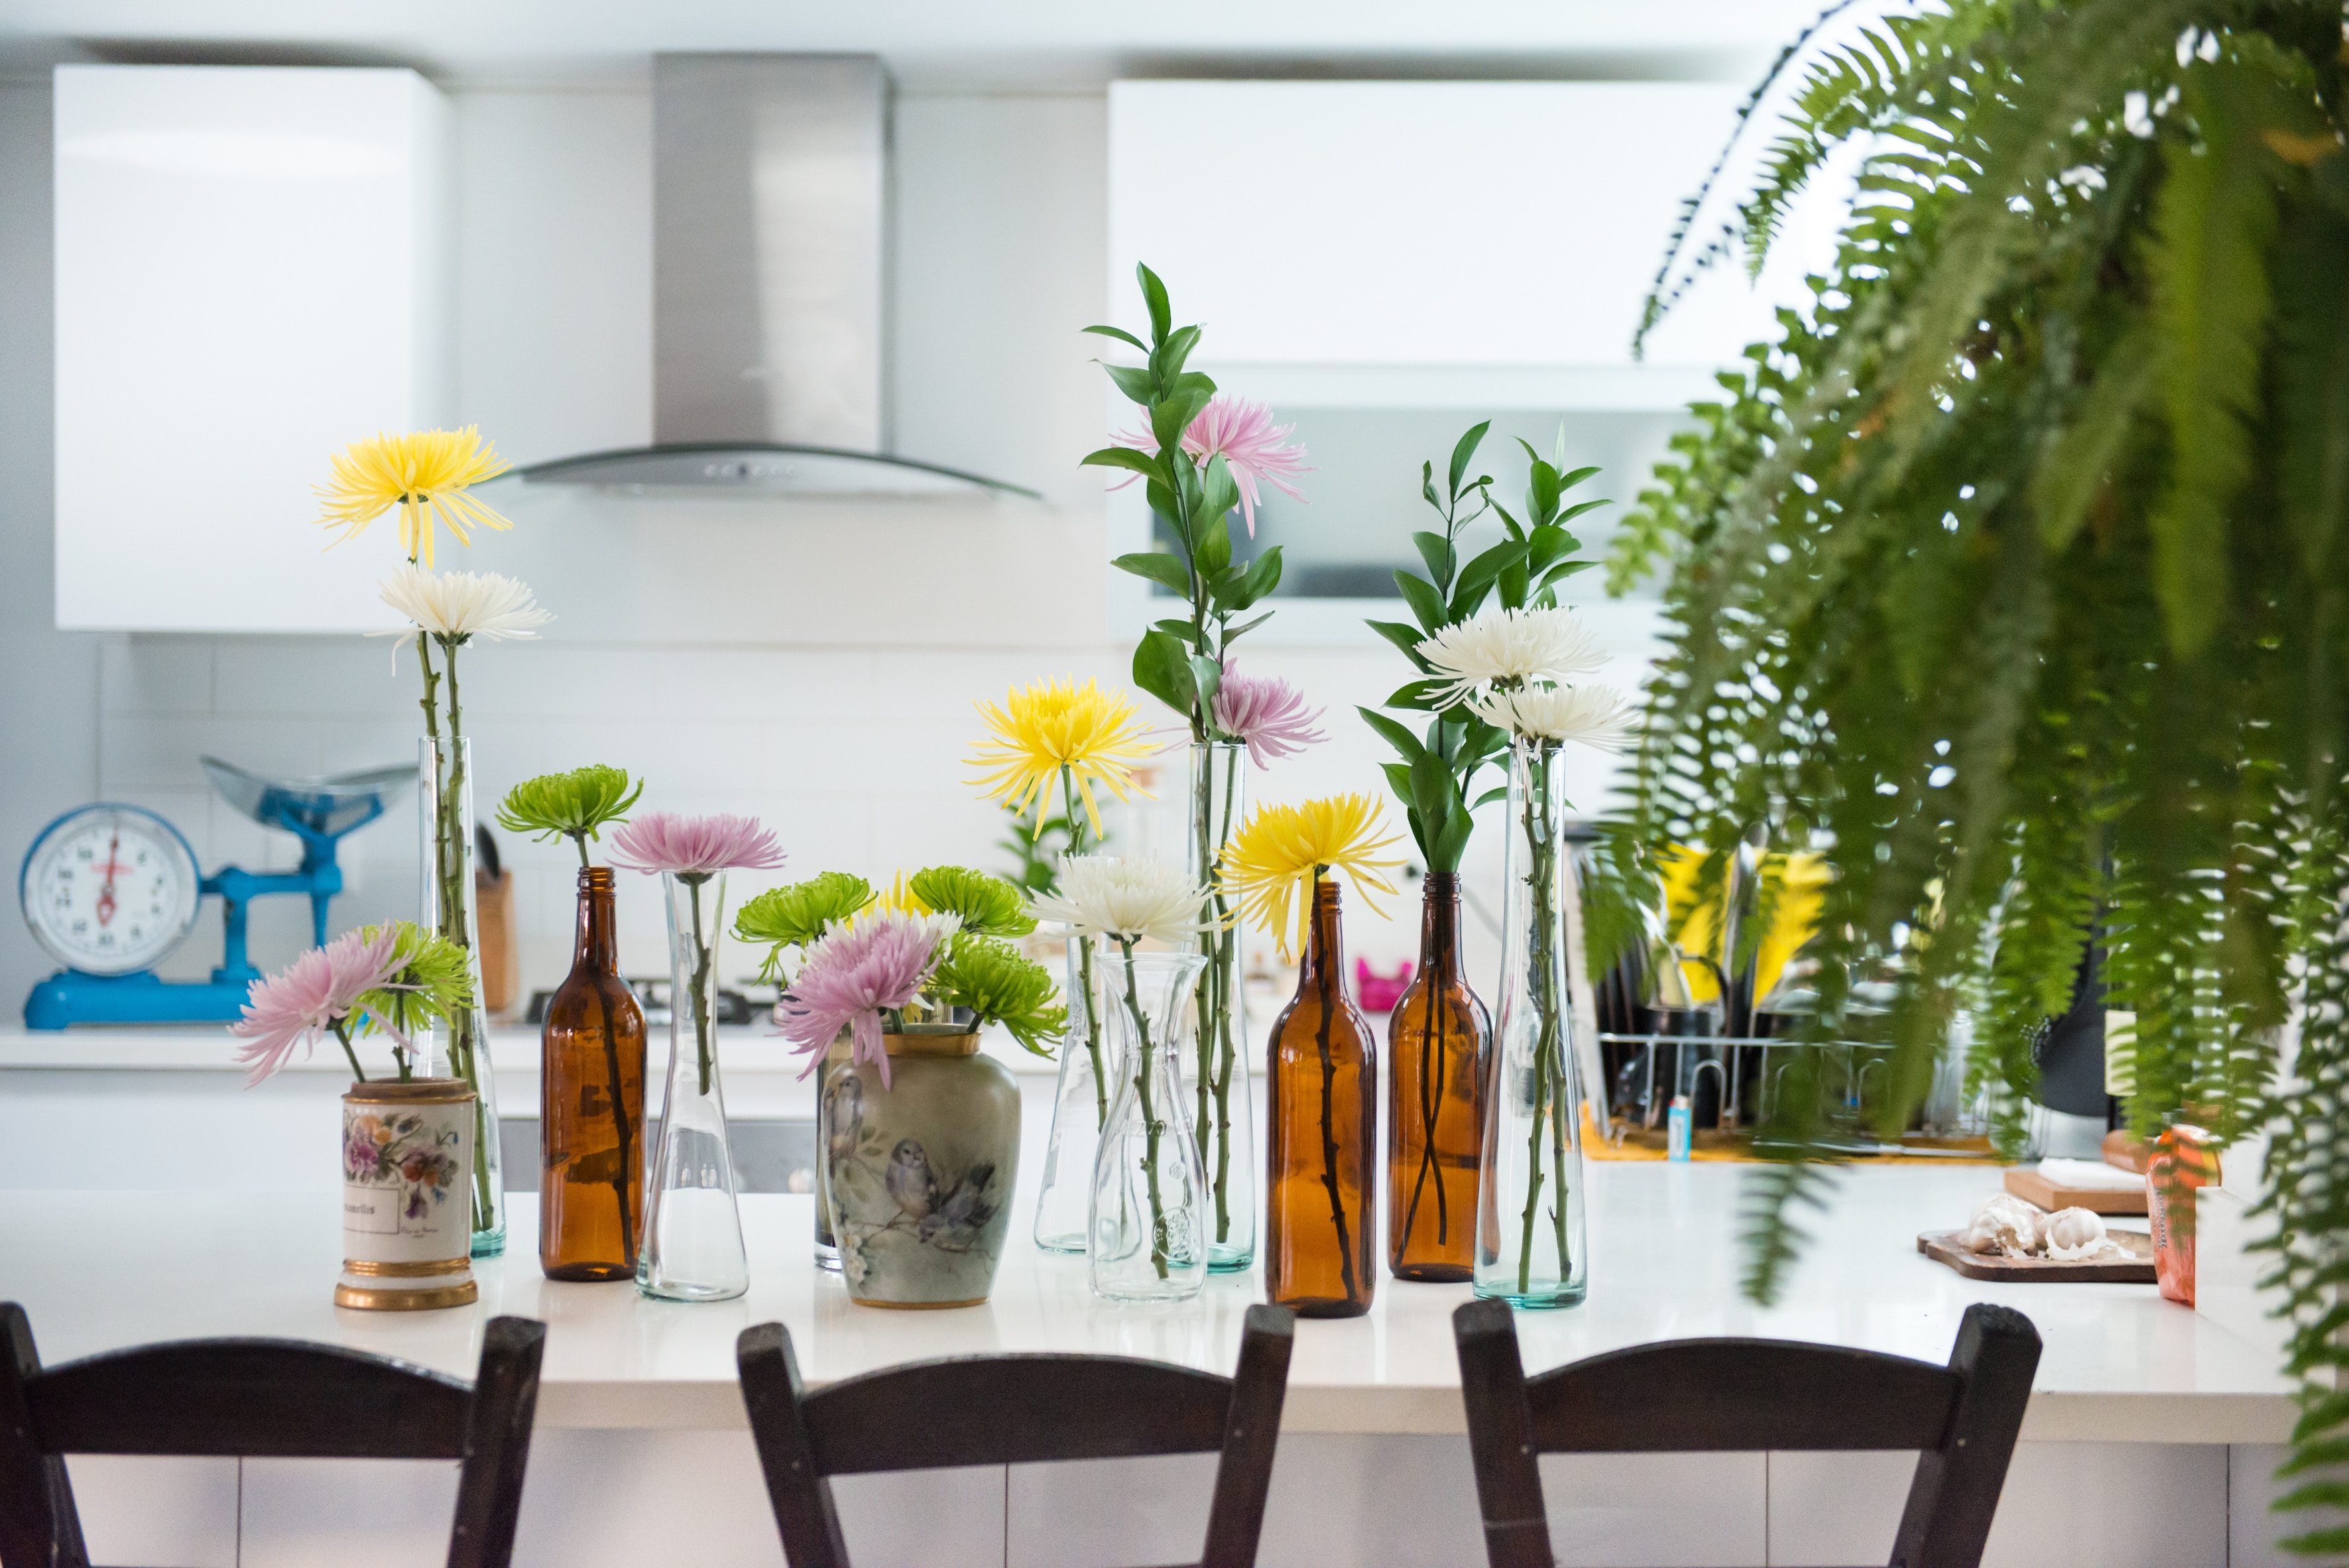 Kitchen with flowers in vases on table